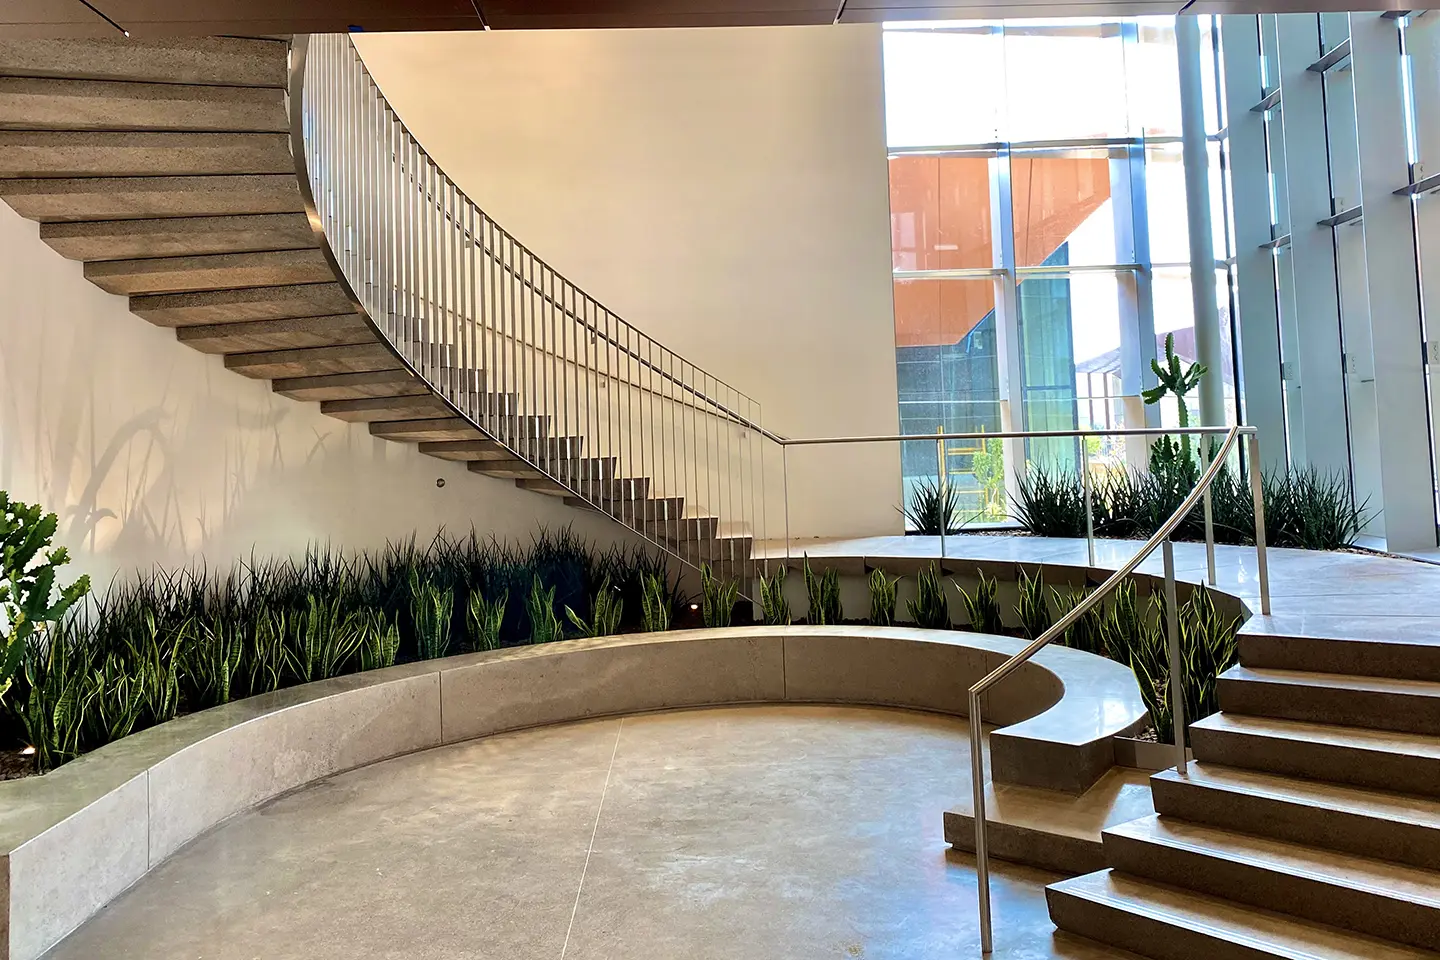 Helios Education Campus Plants in Architecture, staircase